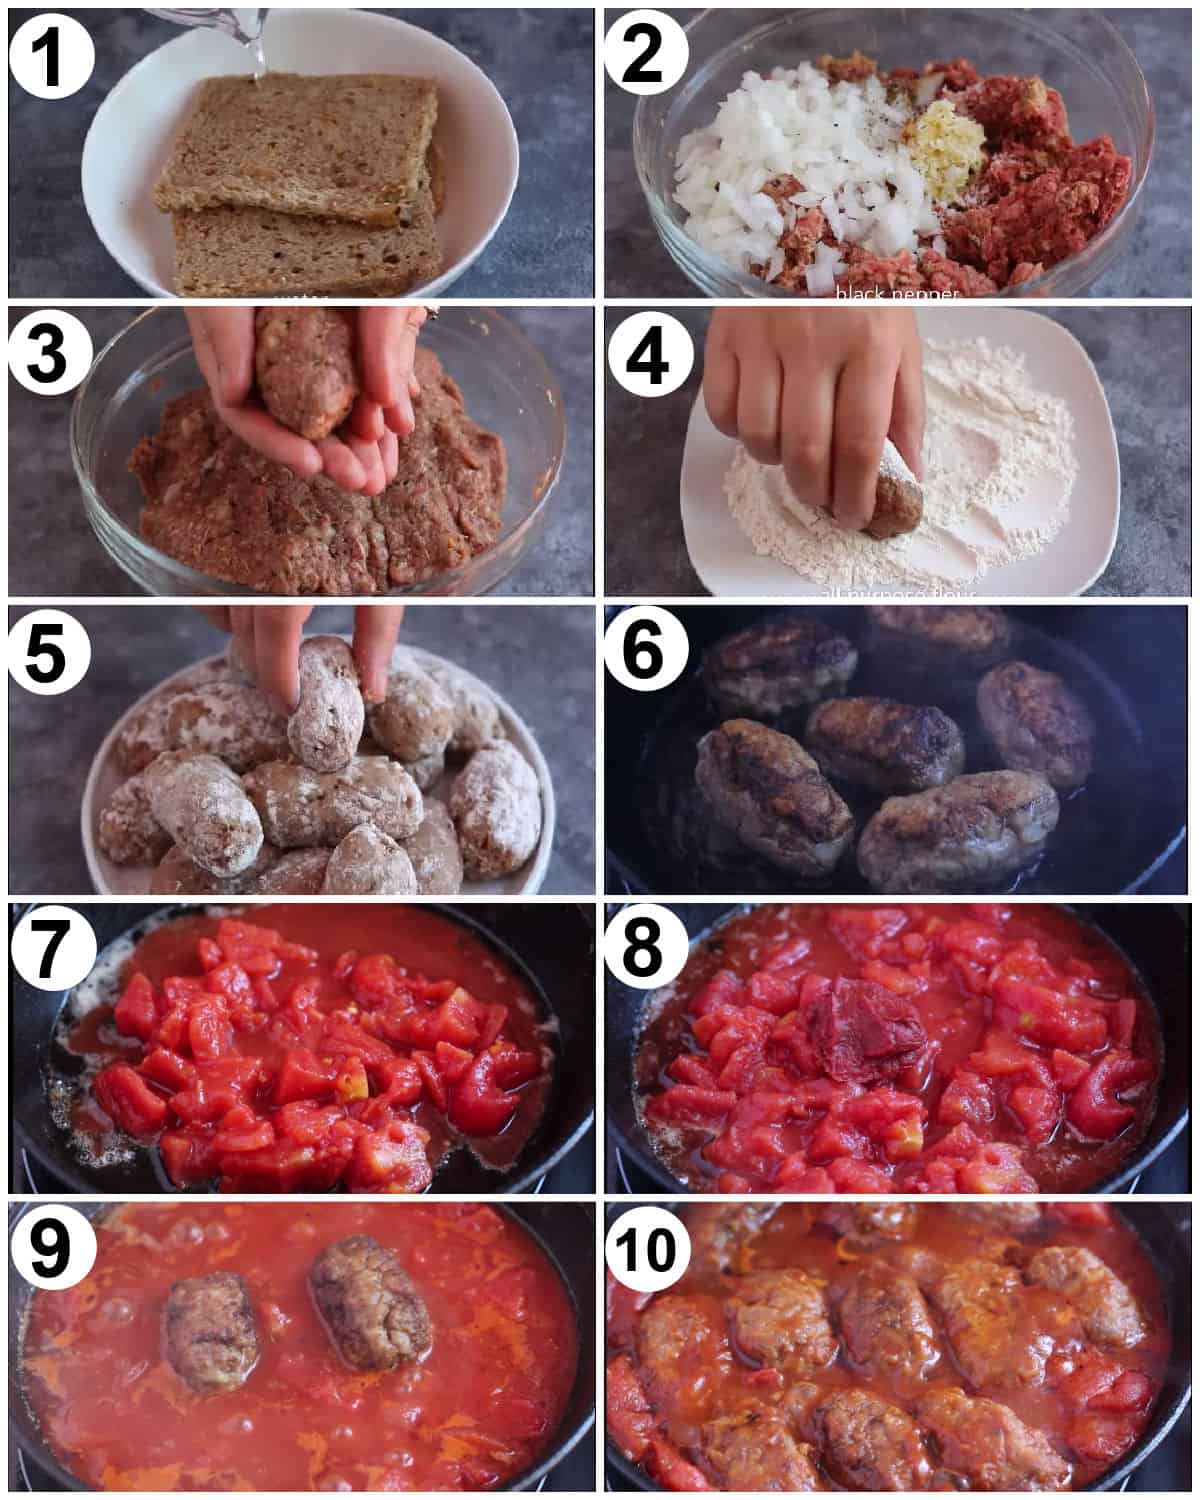 To make Soutzoukakia soak the bread with water then add to the beef and other ingredients. Roll in flour, sear and then cook in the tomato sauce. 